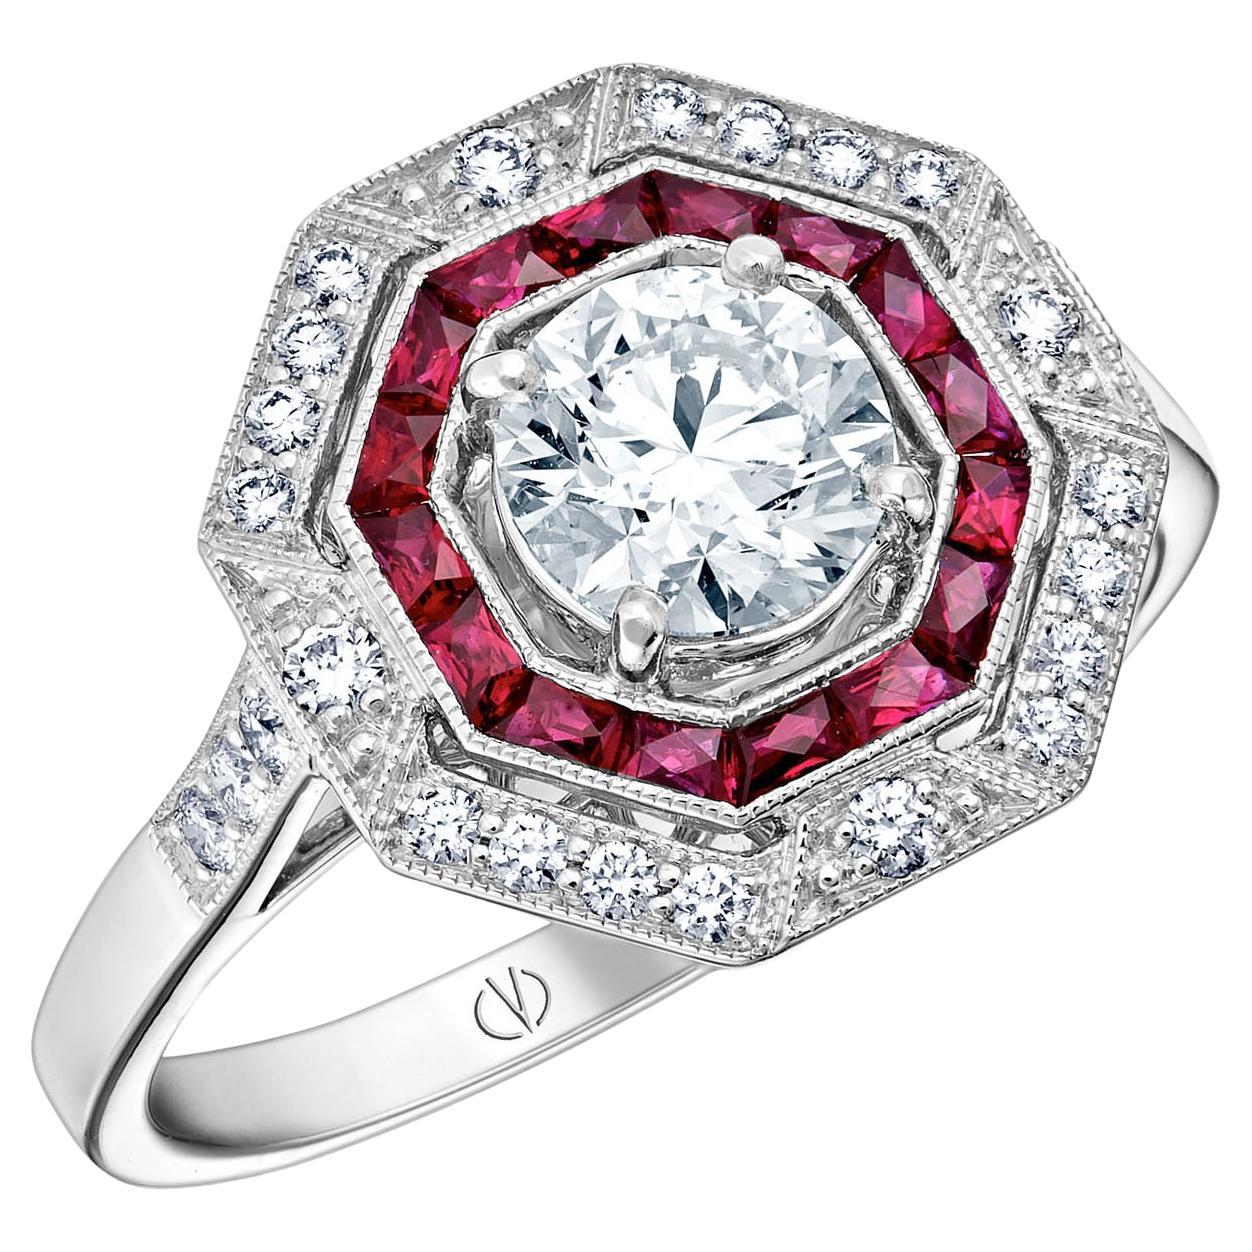 Art Deco Style Platinum Calibre Cut Ruby Ring With 0.70 Ct Diamond GIA Certified